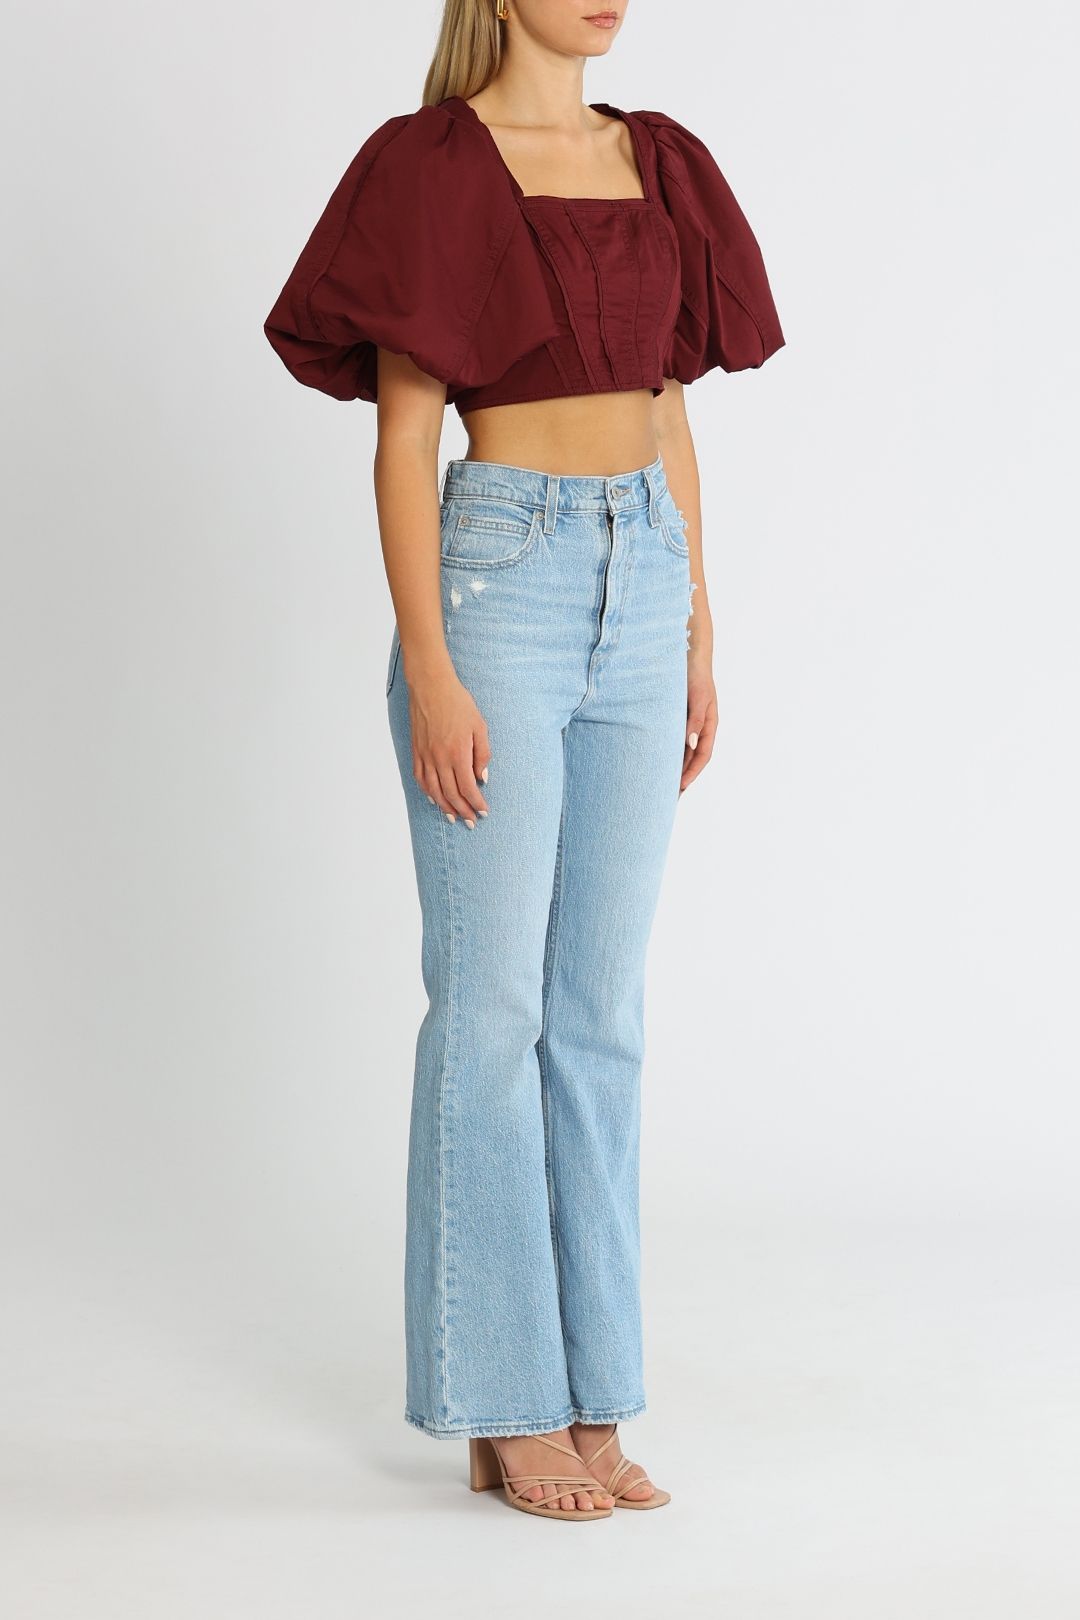 AJE Sylvia Cropped Top Chestnut Red Balloon Sleeves